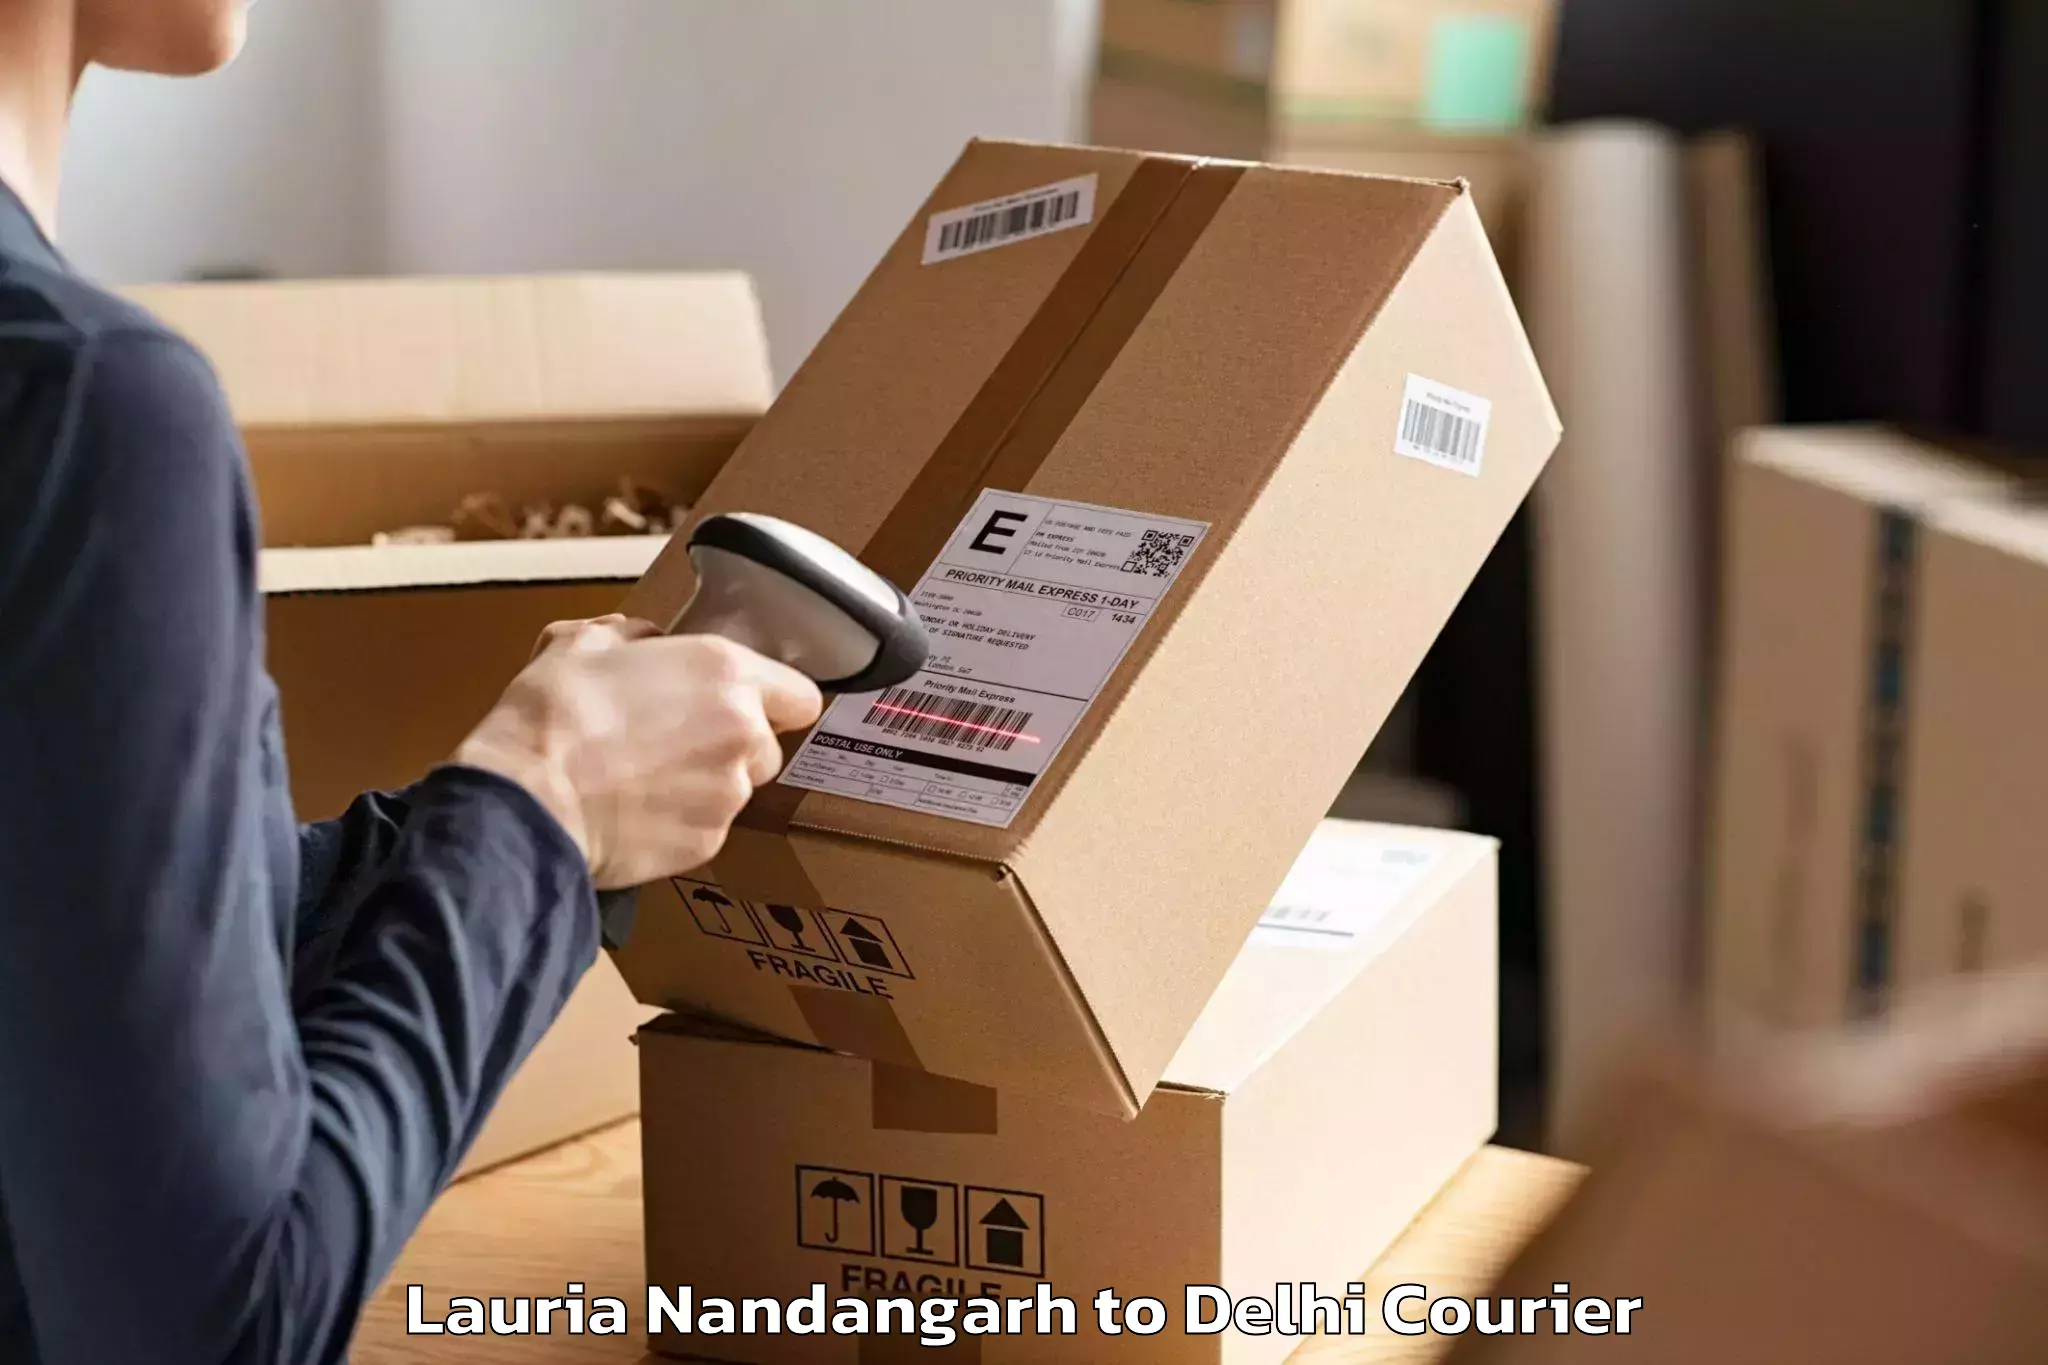 Moving and handling services Lauria Nandangarh to Delhi